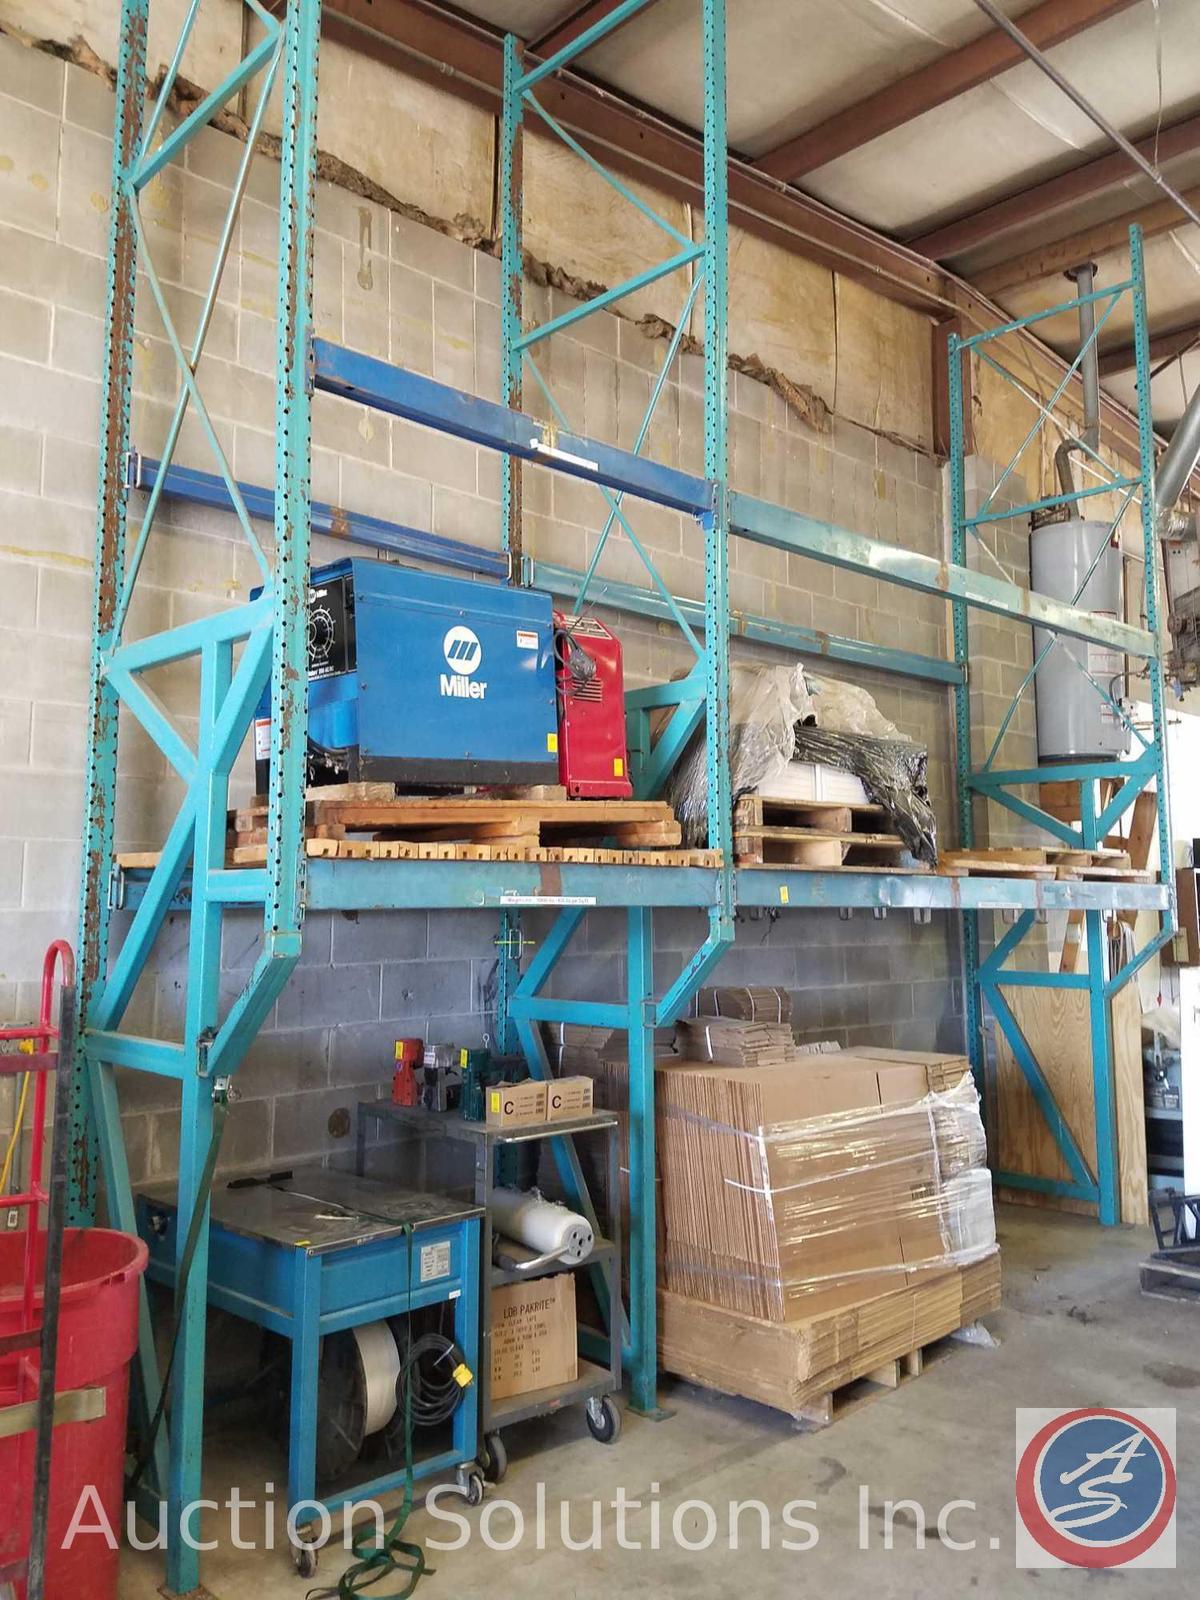 Pallet rack with wood 16.5 ft wide by 16.5 ft tall by 3.5 ft deep all together (Pallets are not